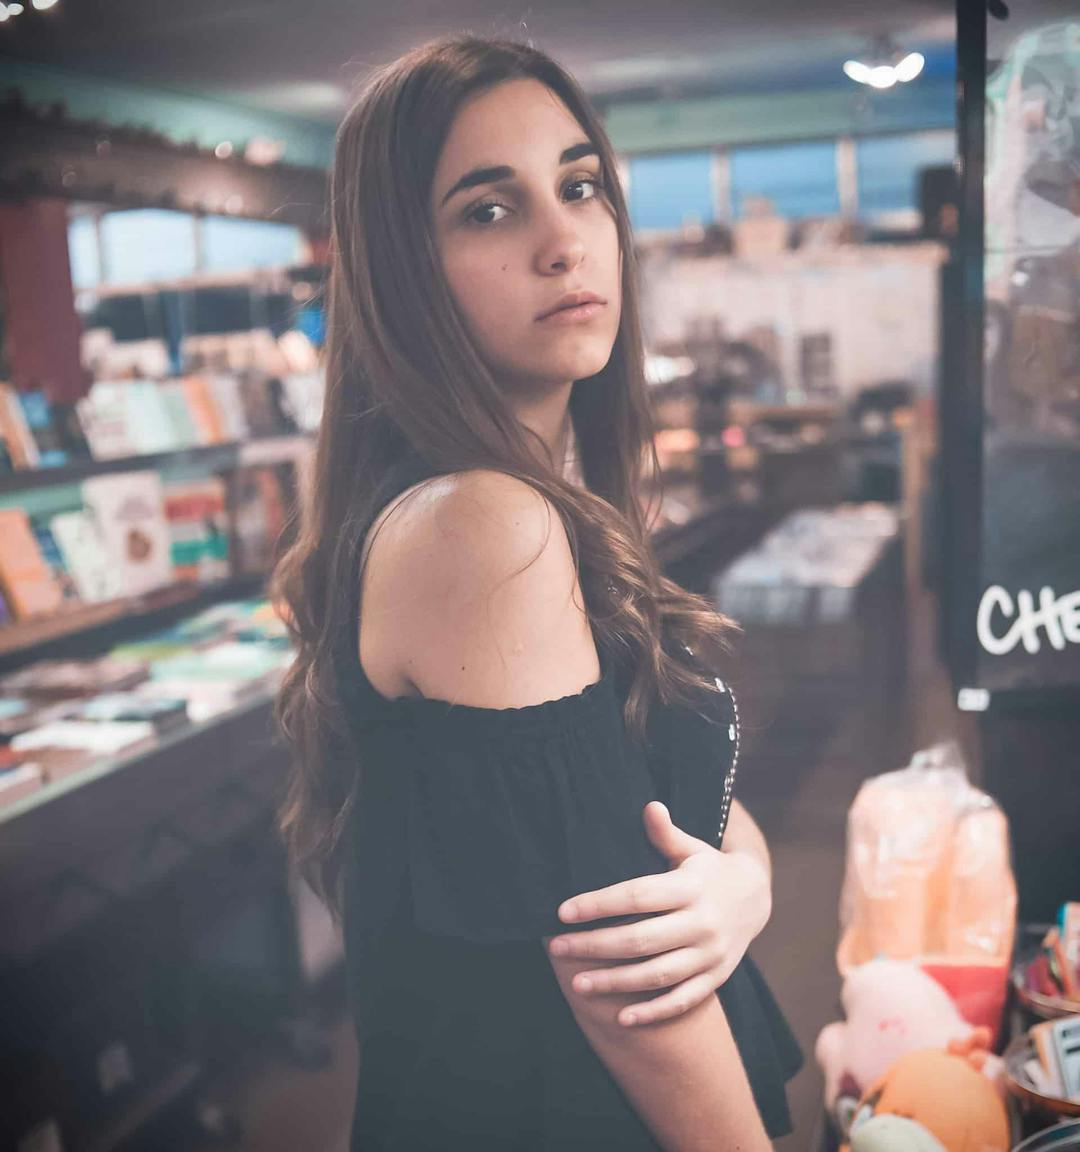 Girl looking at camera in a bookstore.